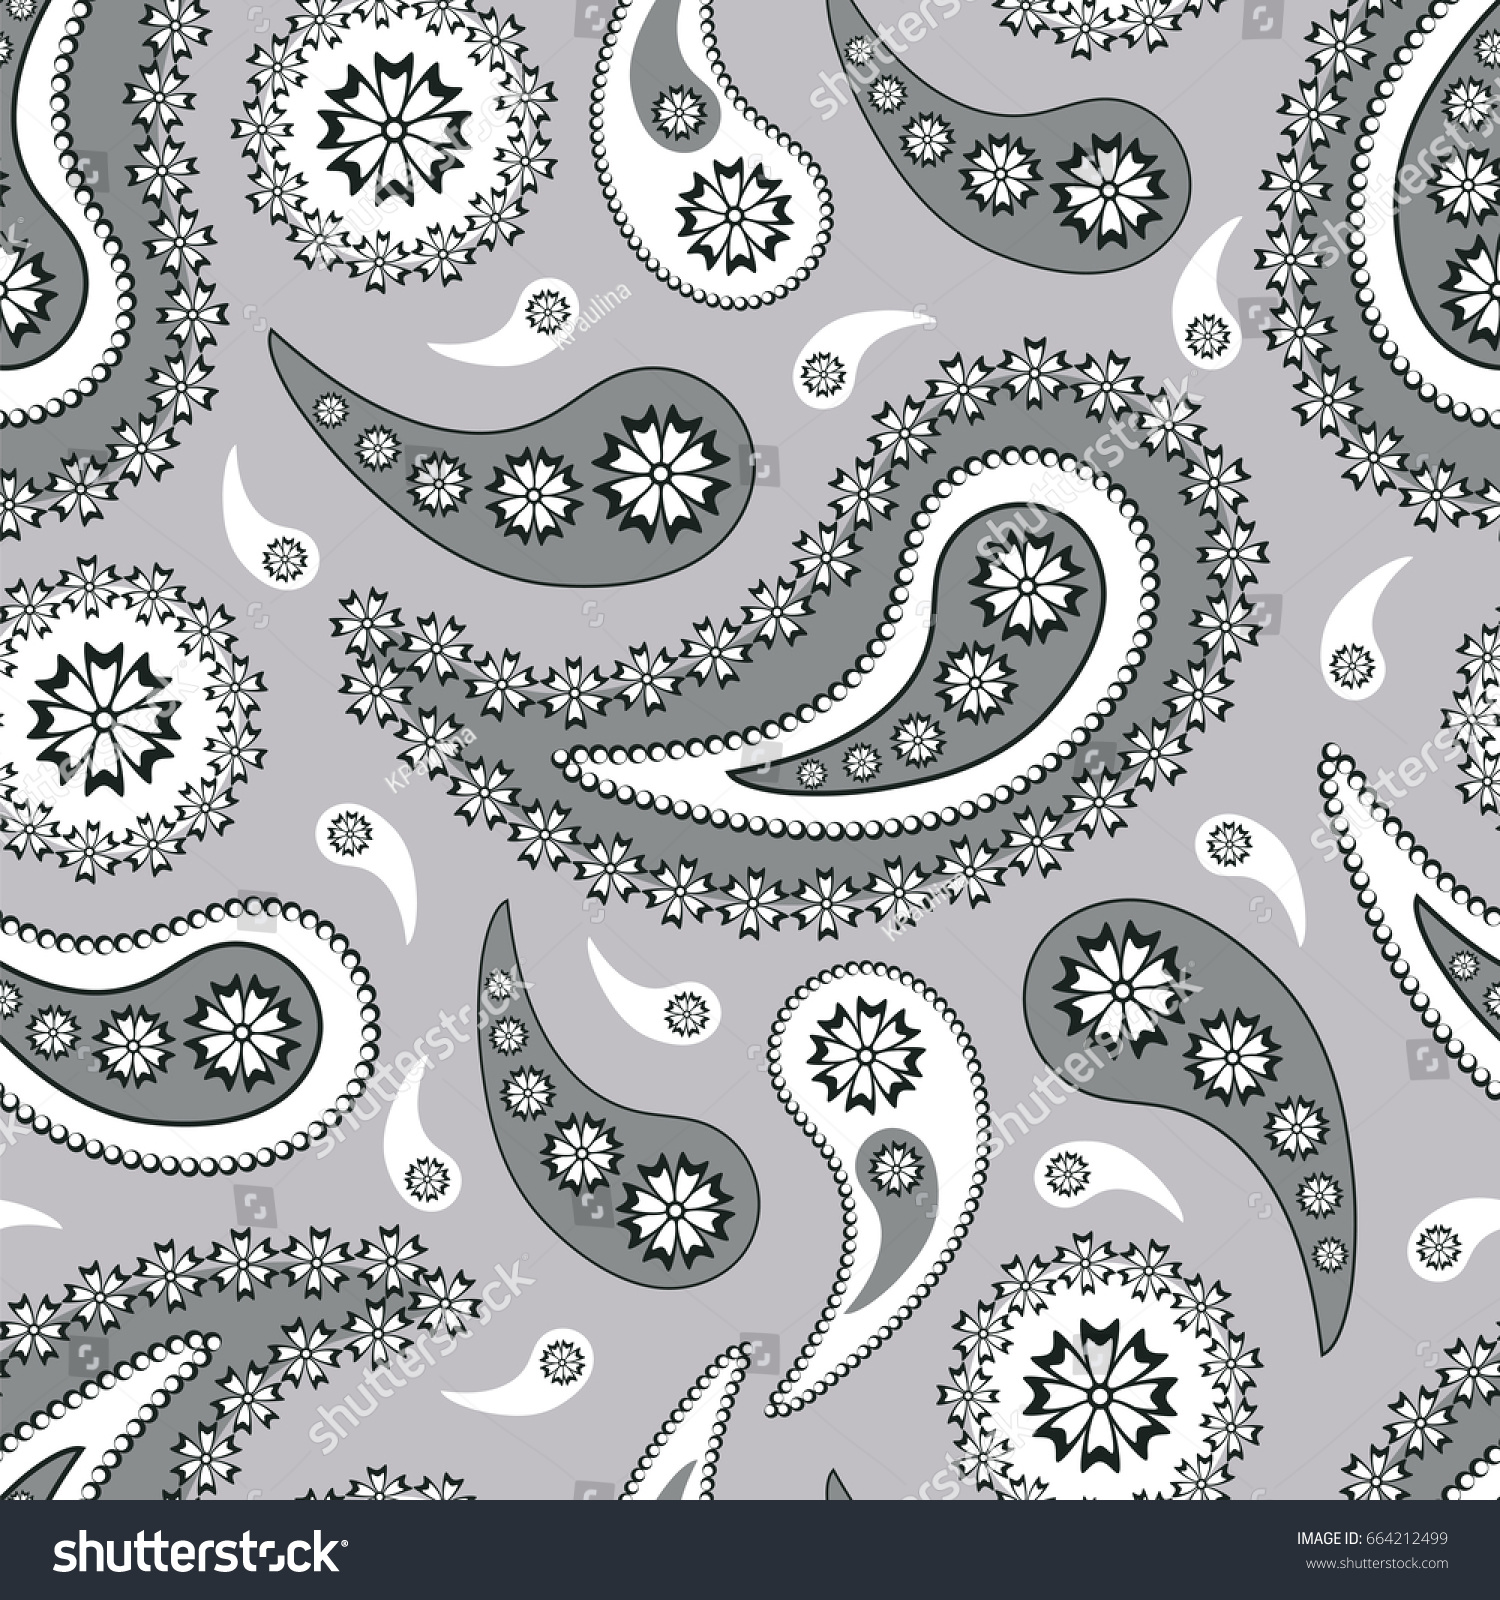 Black White Seamless Paisley Pattern Vector Stock Vector (Royalty Free ...